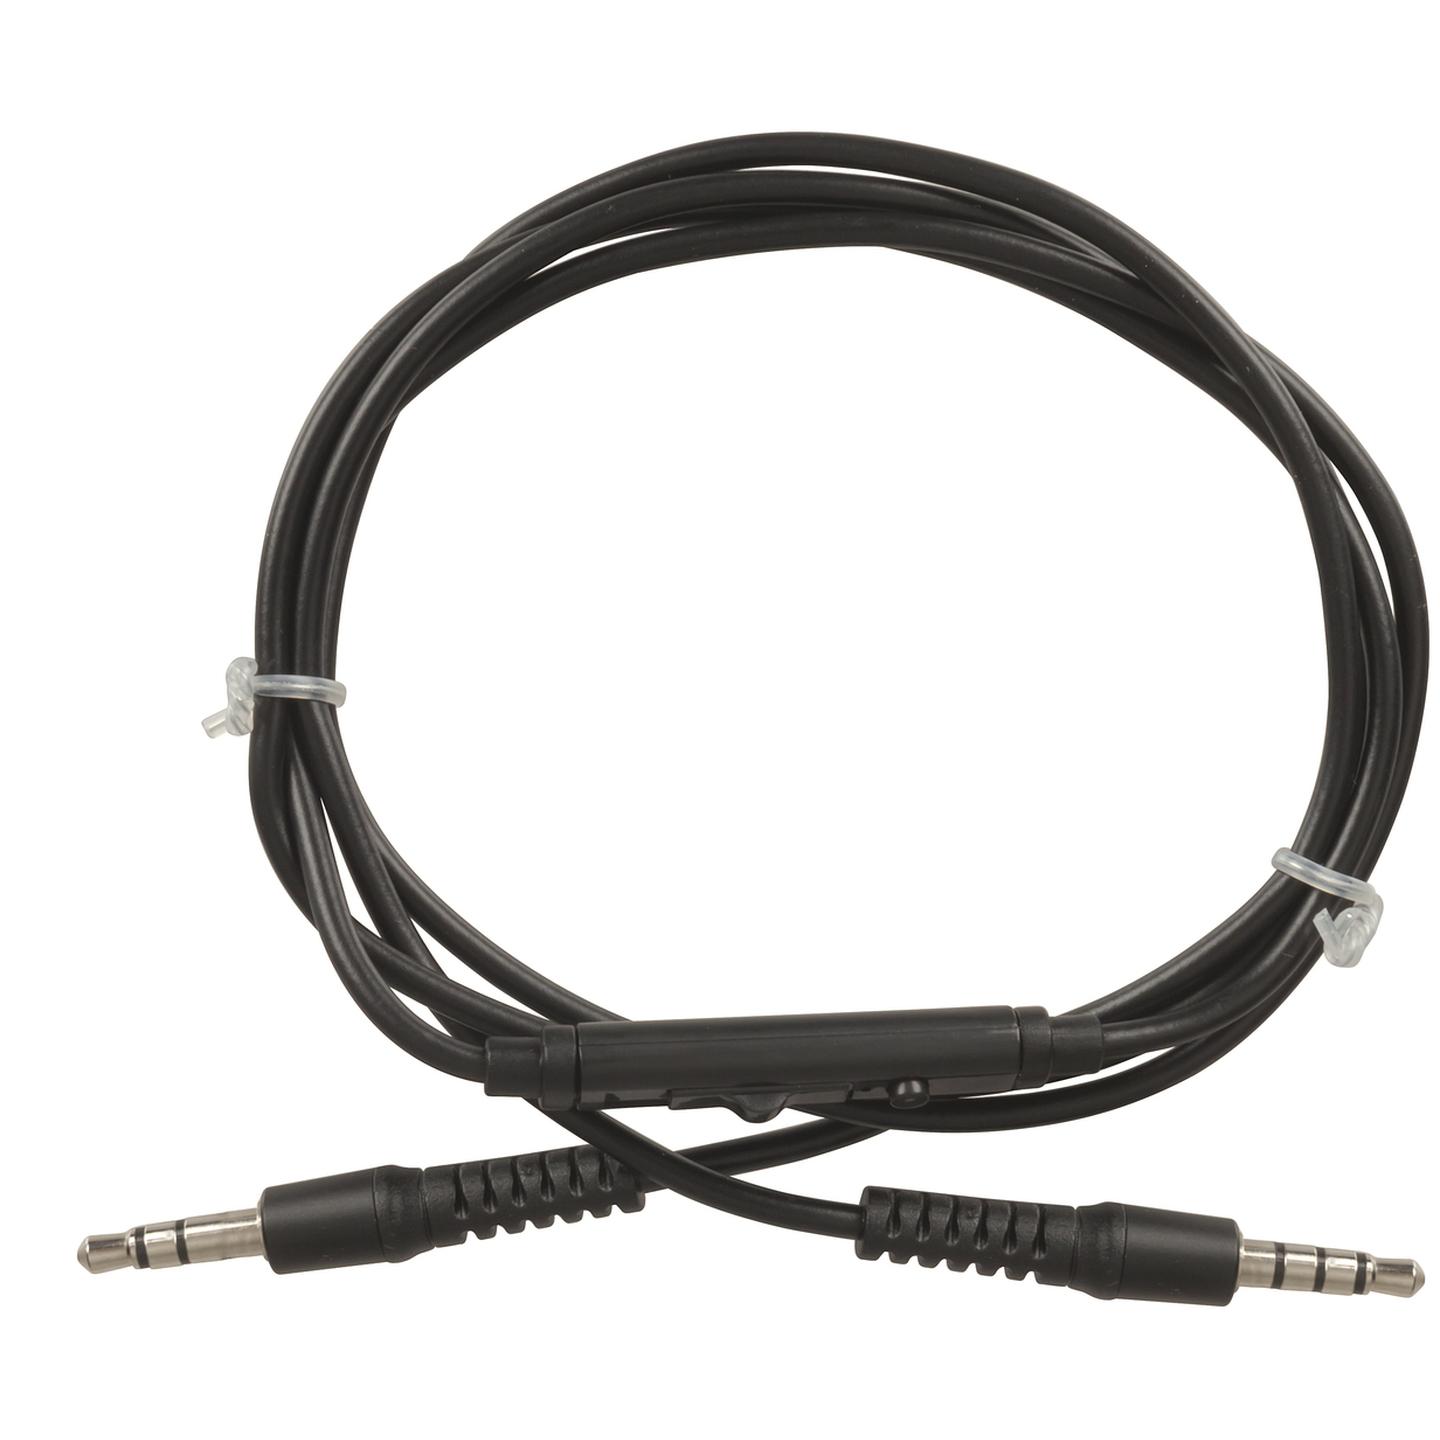 3.5mm Plug to Plug Cable with Microphone and Volume Control - 1m